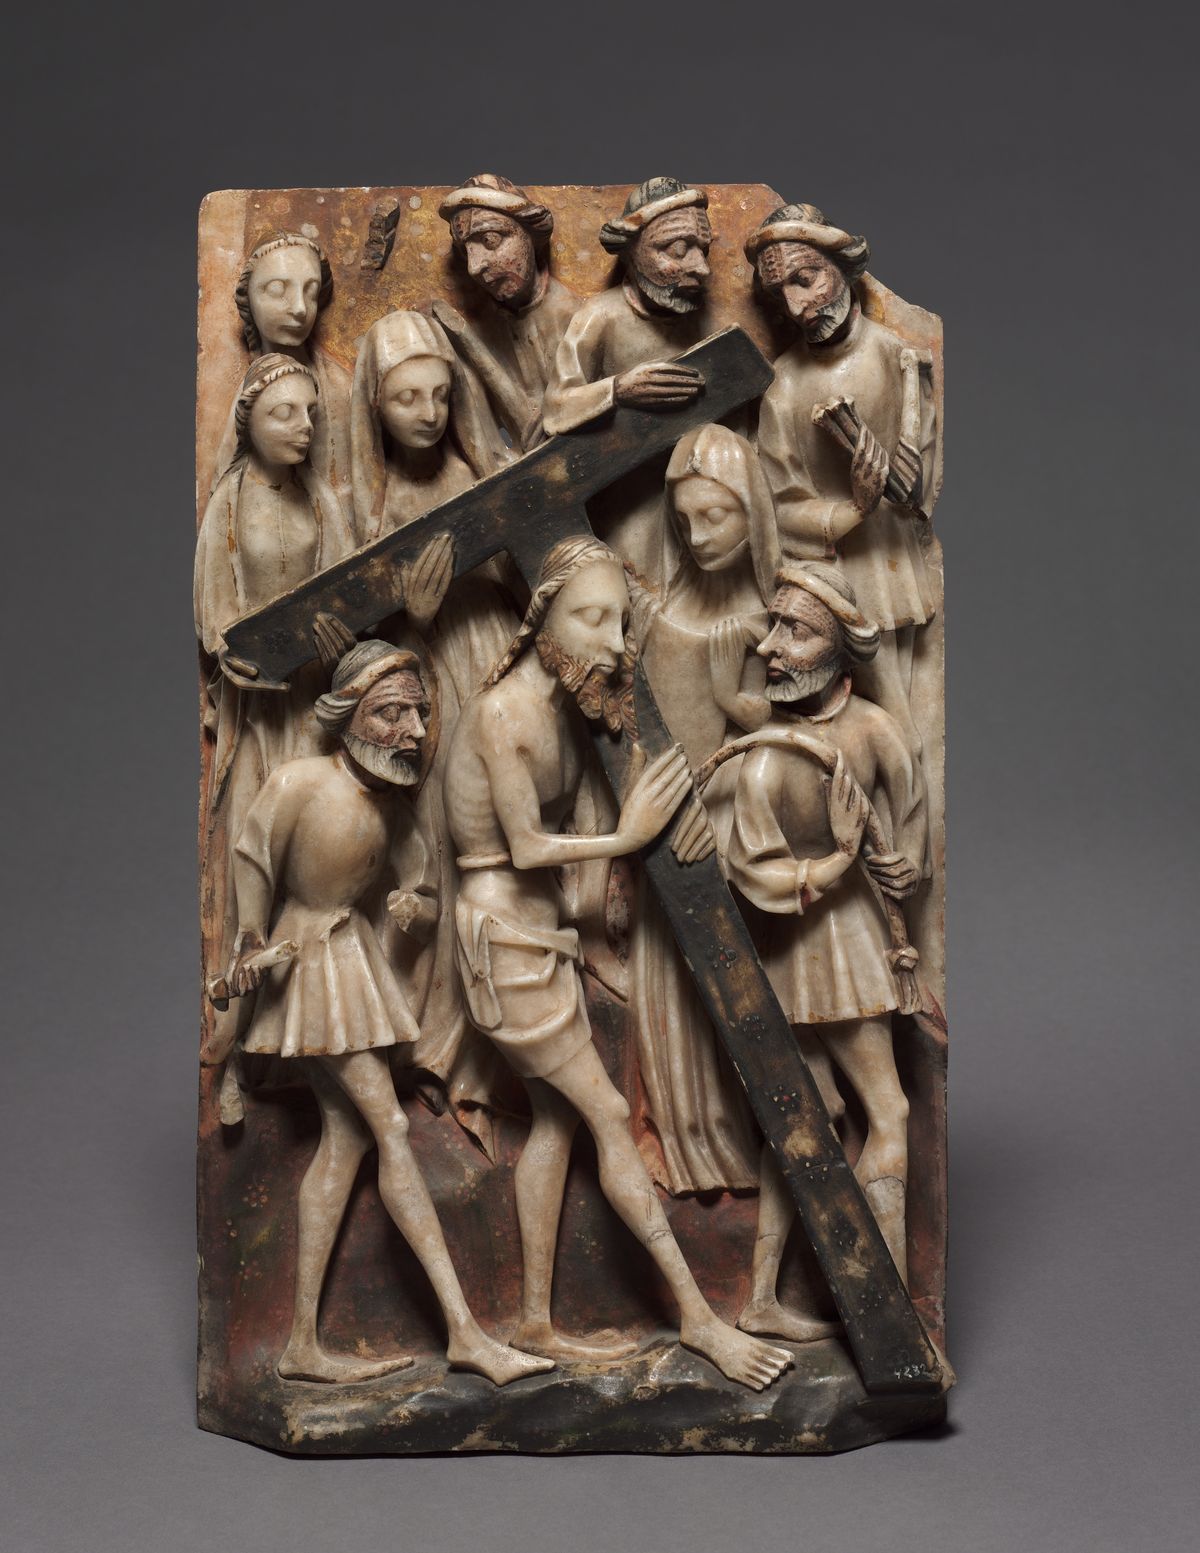 Christ Carrying the Cross (Panel from an Altarpiece) (1400s, England, Nottingham) - Catholic Stock Photo